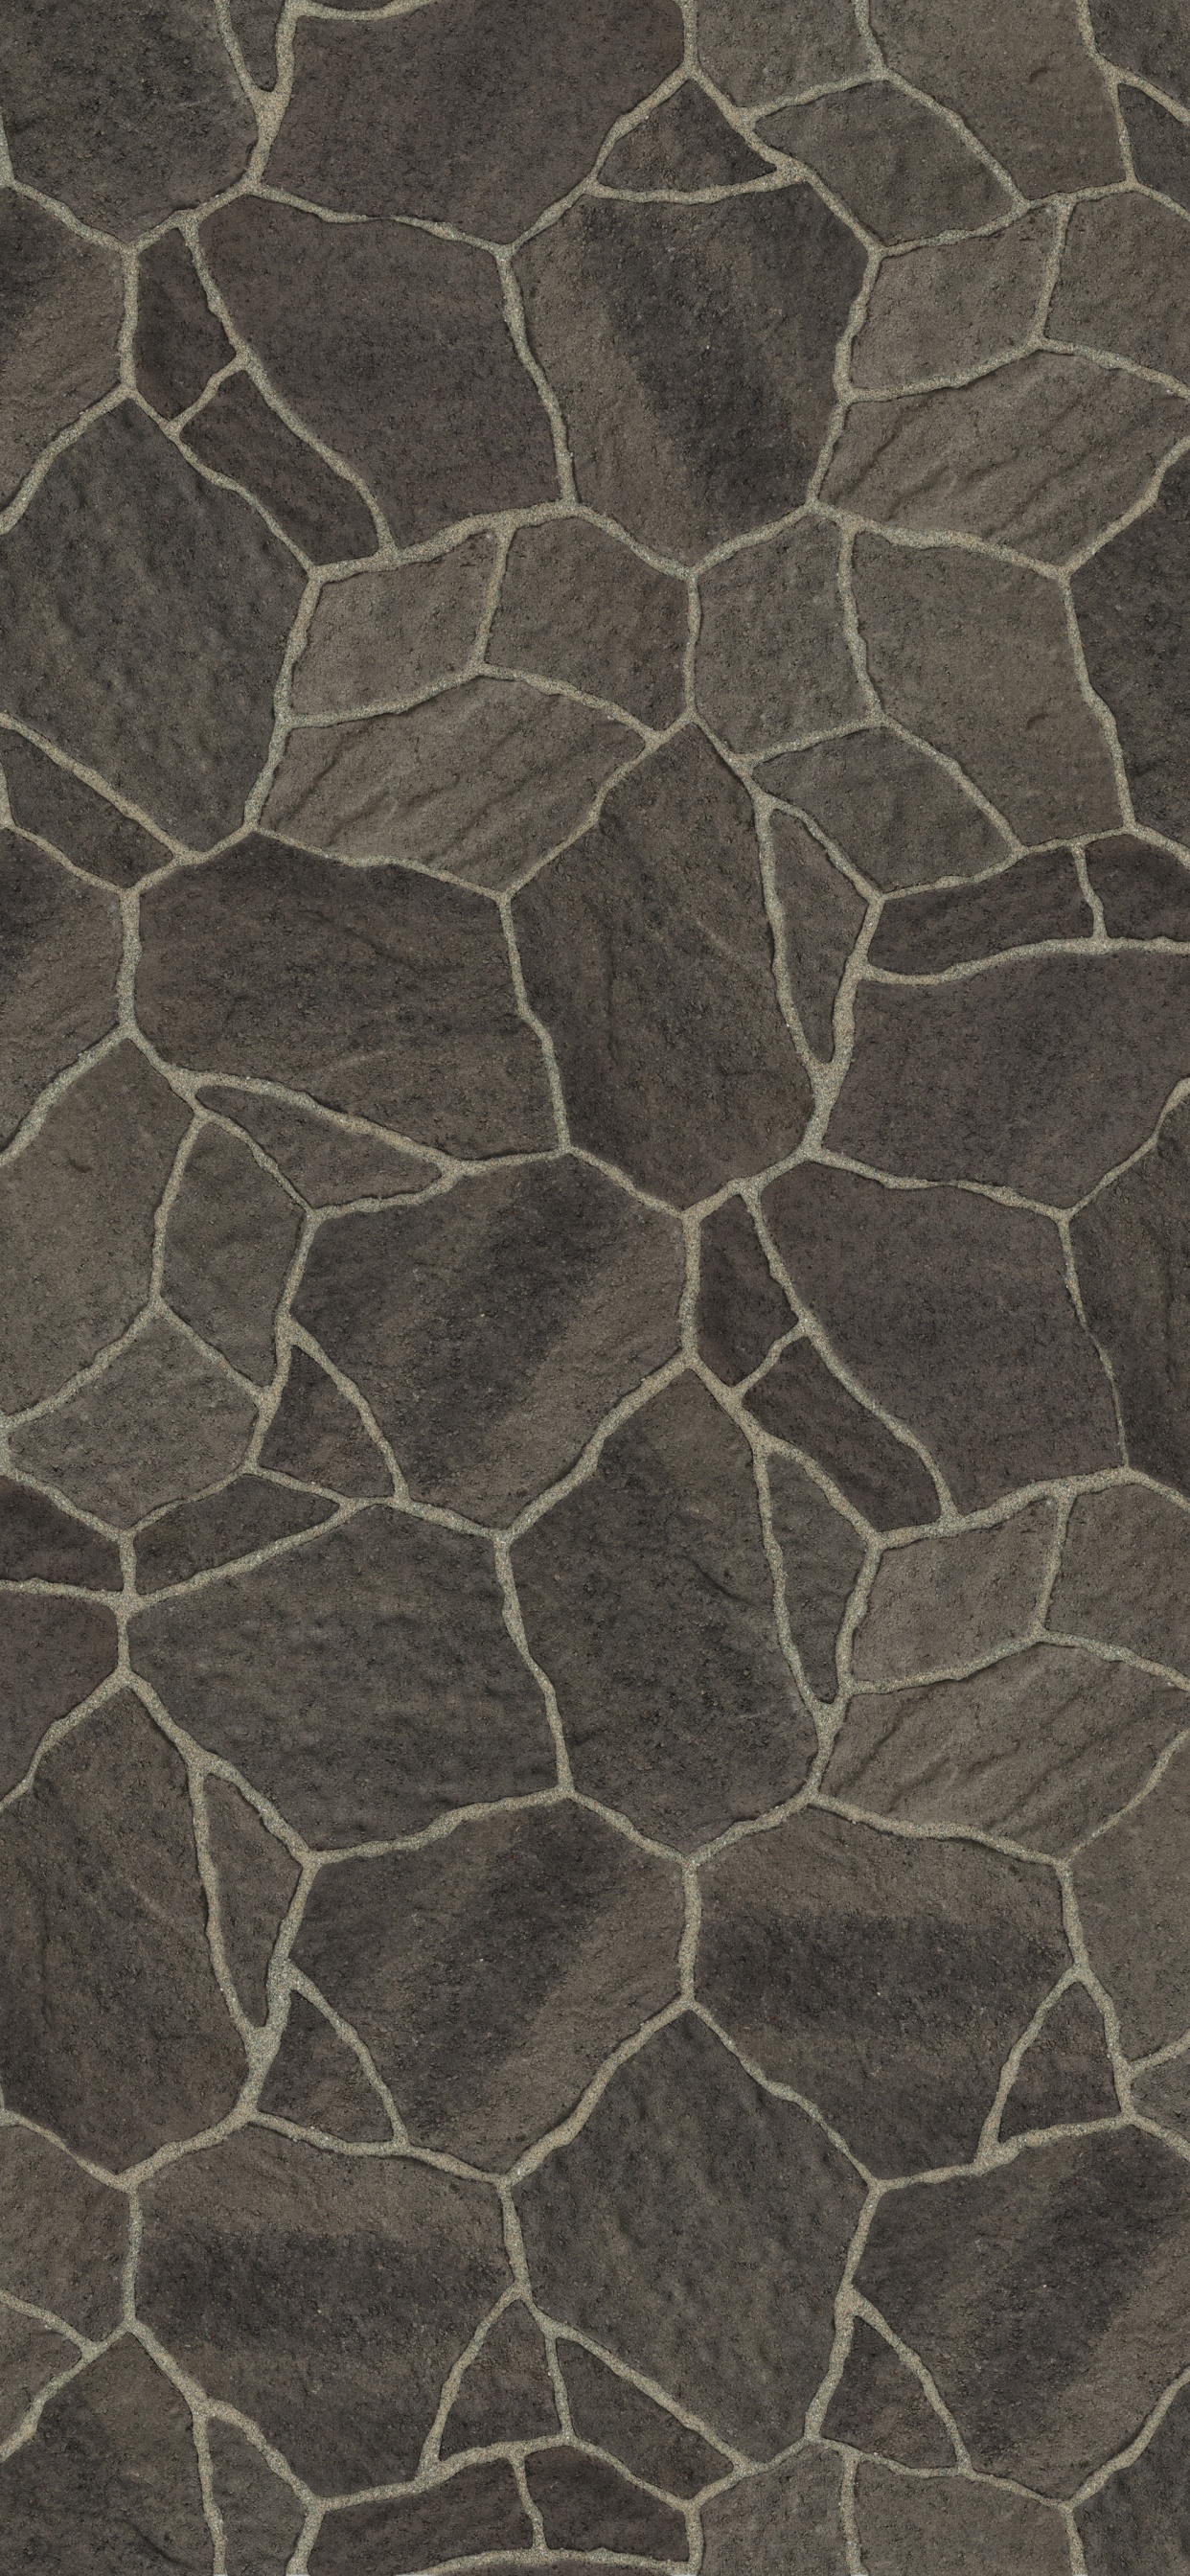 Brown and Black Concrete Floor. Wallpaper in 1242x2688 Resolution